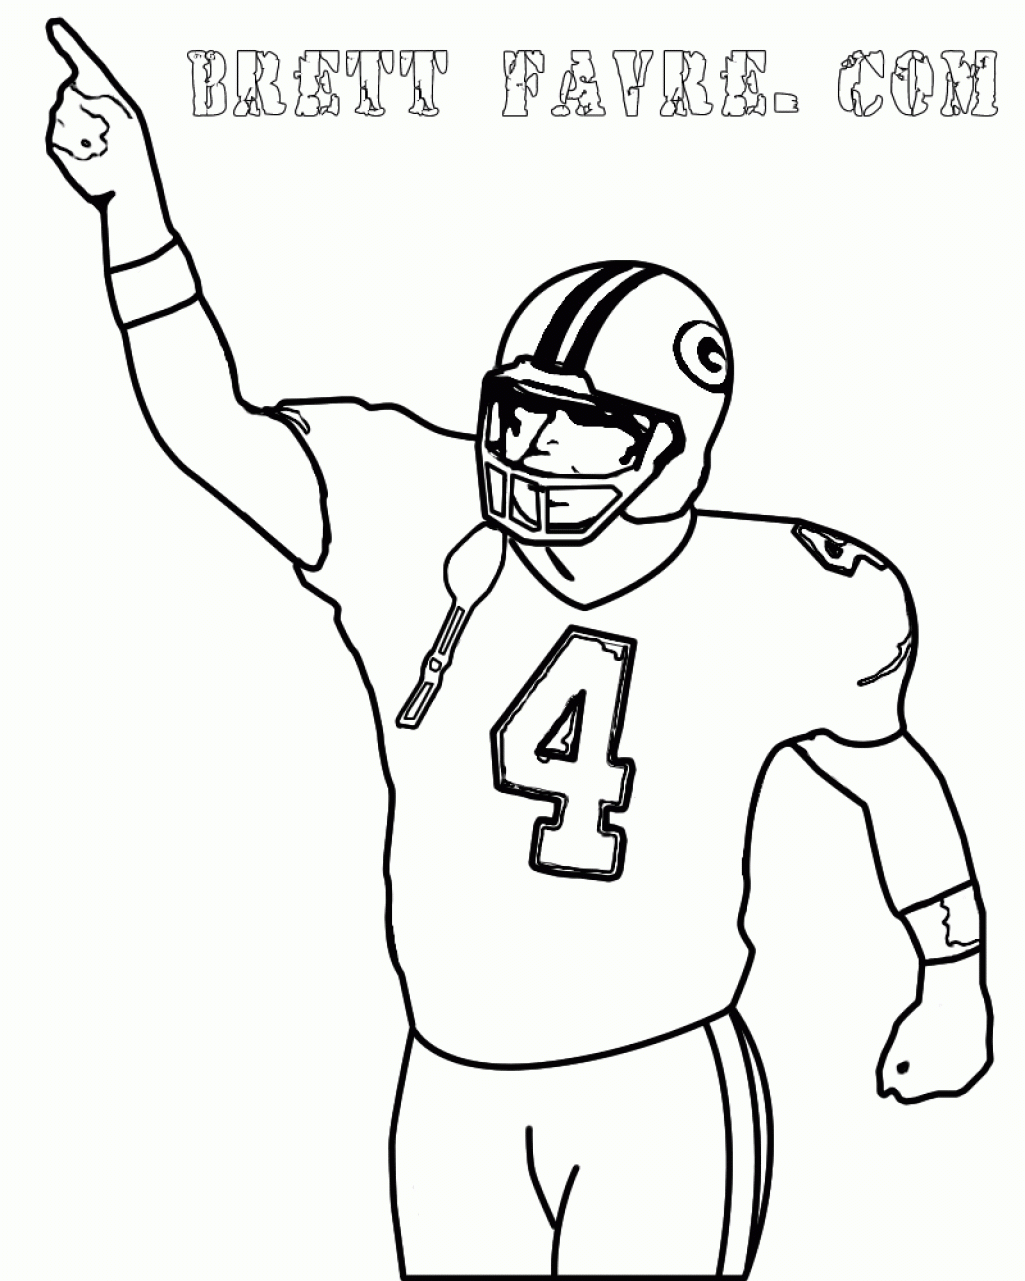 Soccer Jersey Coloring Page Coloring Home